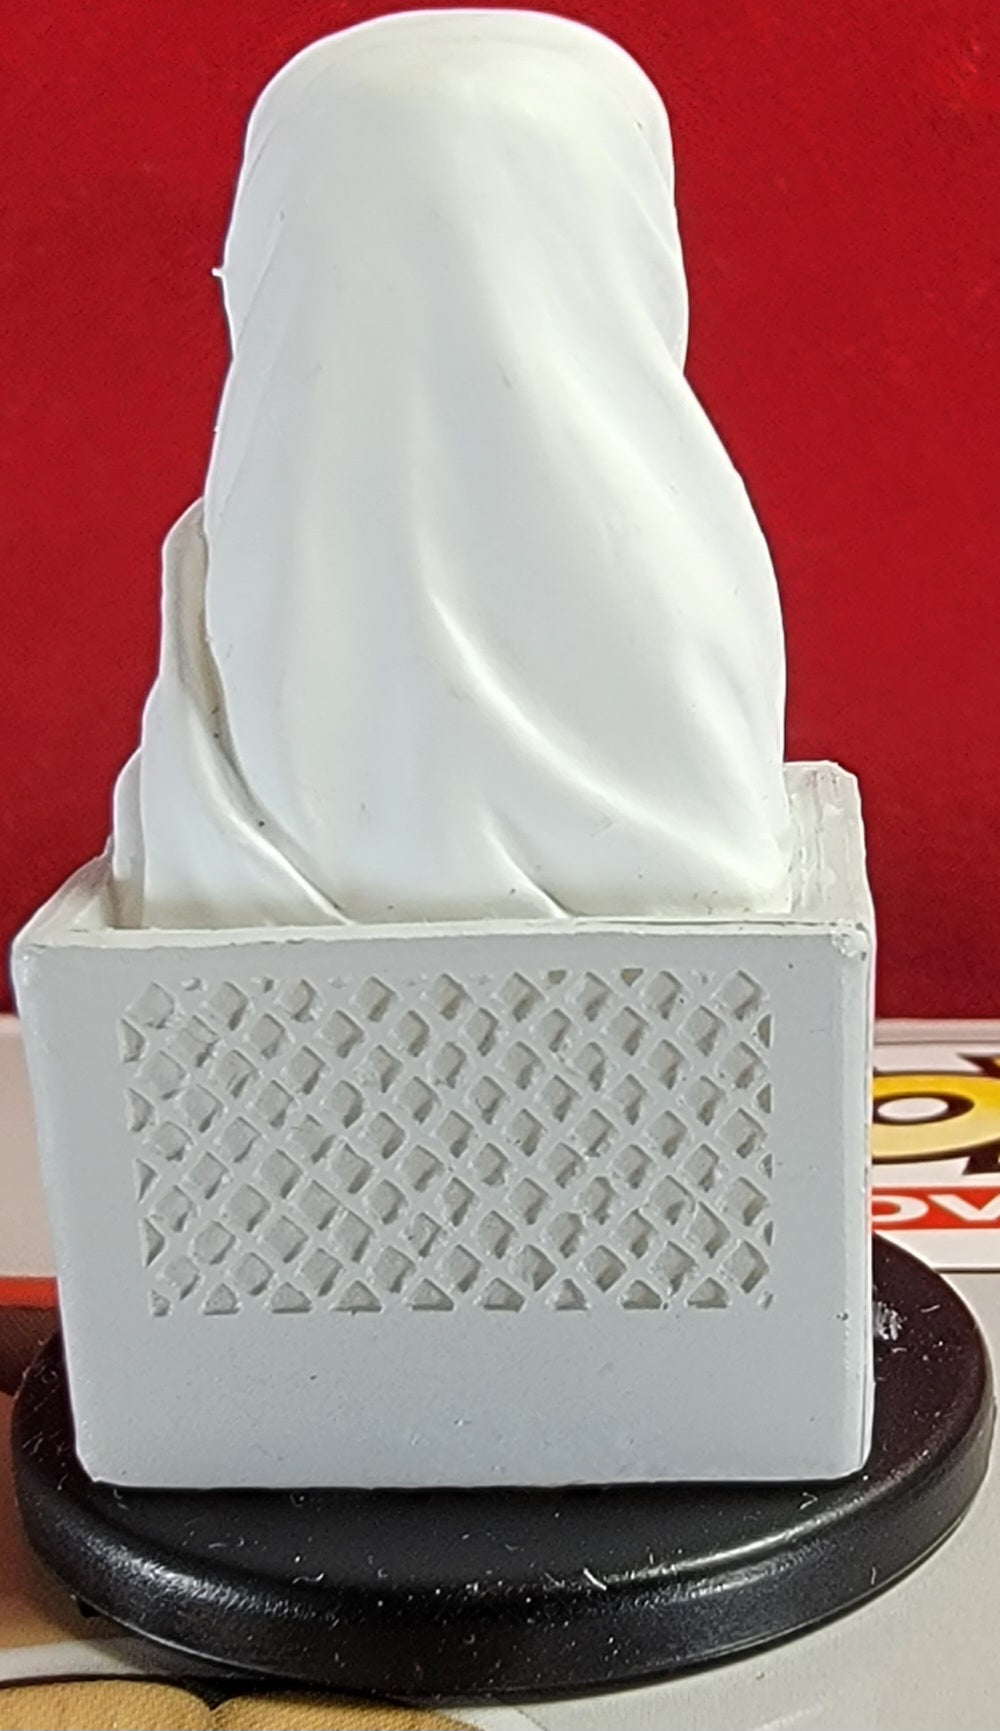 E.t. blind mini (2012)
brand new 1 3/4 inch e.t. wrapped in white sheet riding in a bicycle basket. item is produced by wizkids/neca llc.